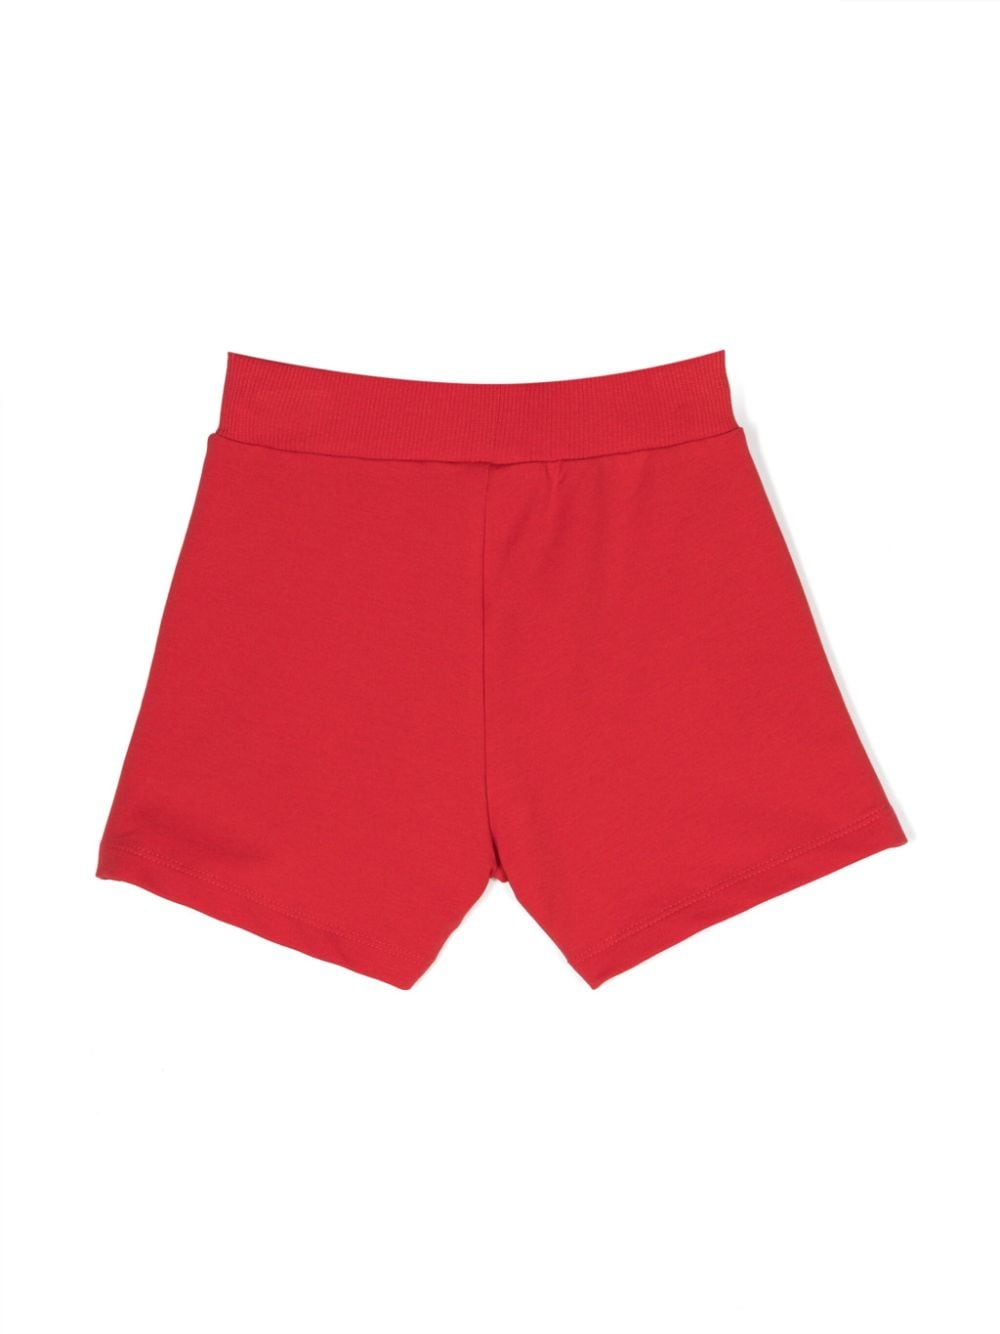 Red shorts for girls with logo